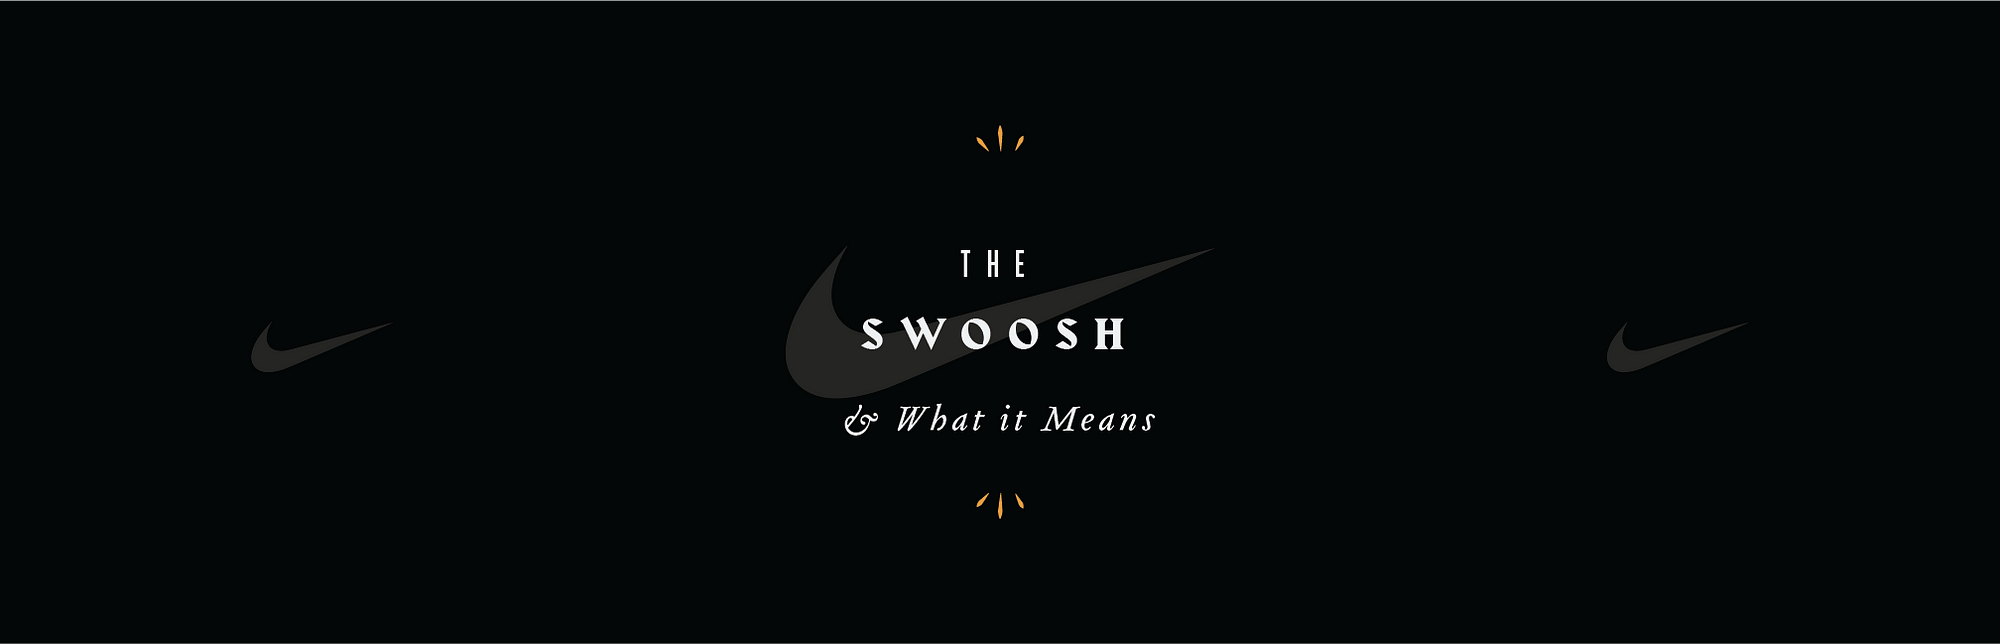 Nike's Secret to Success: the Swoosh., by Sherwood Fellows